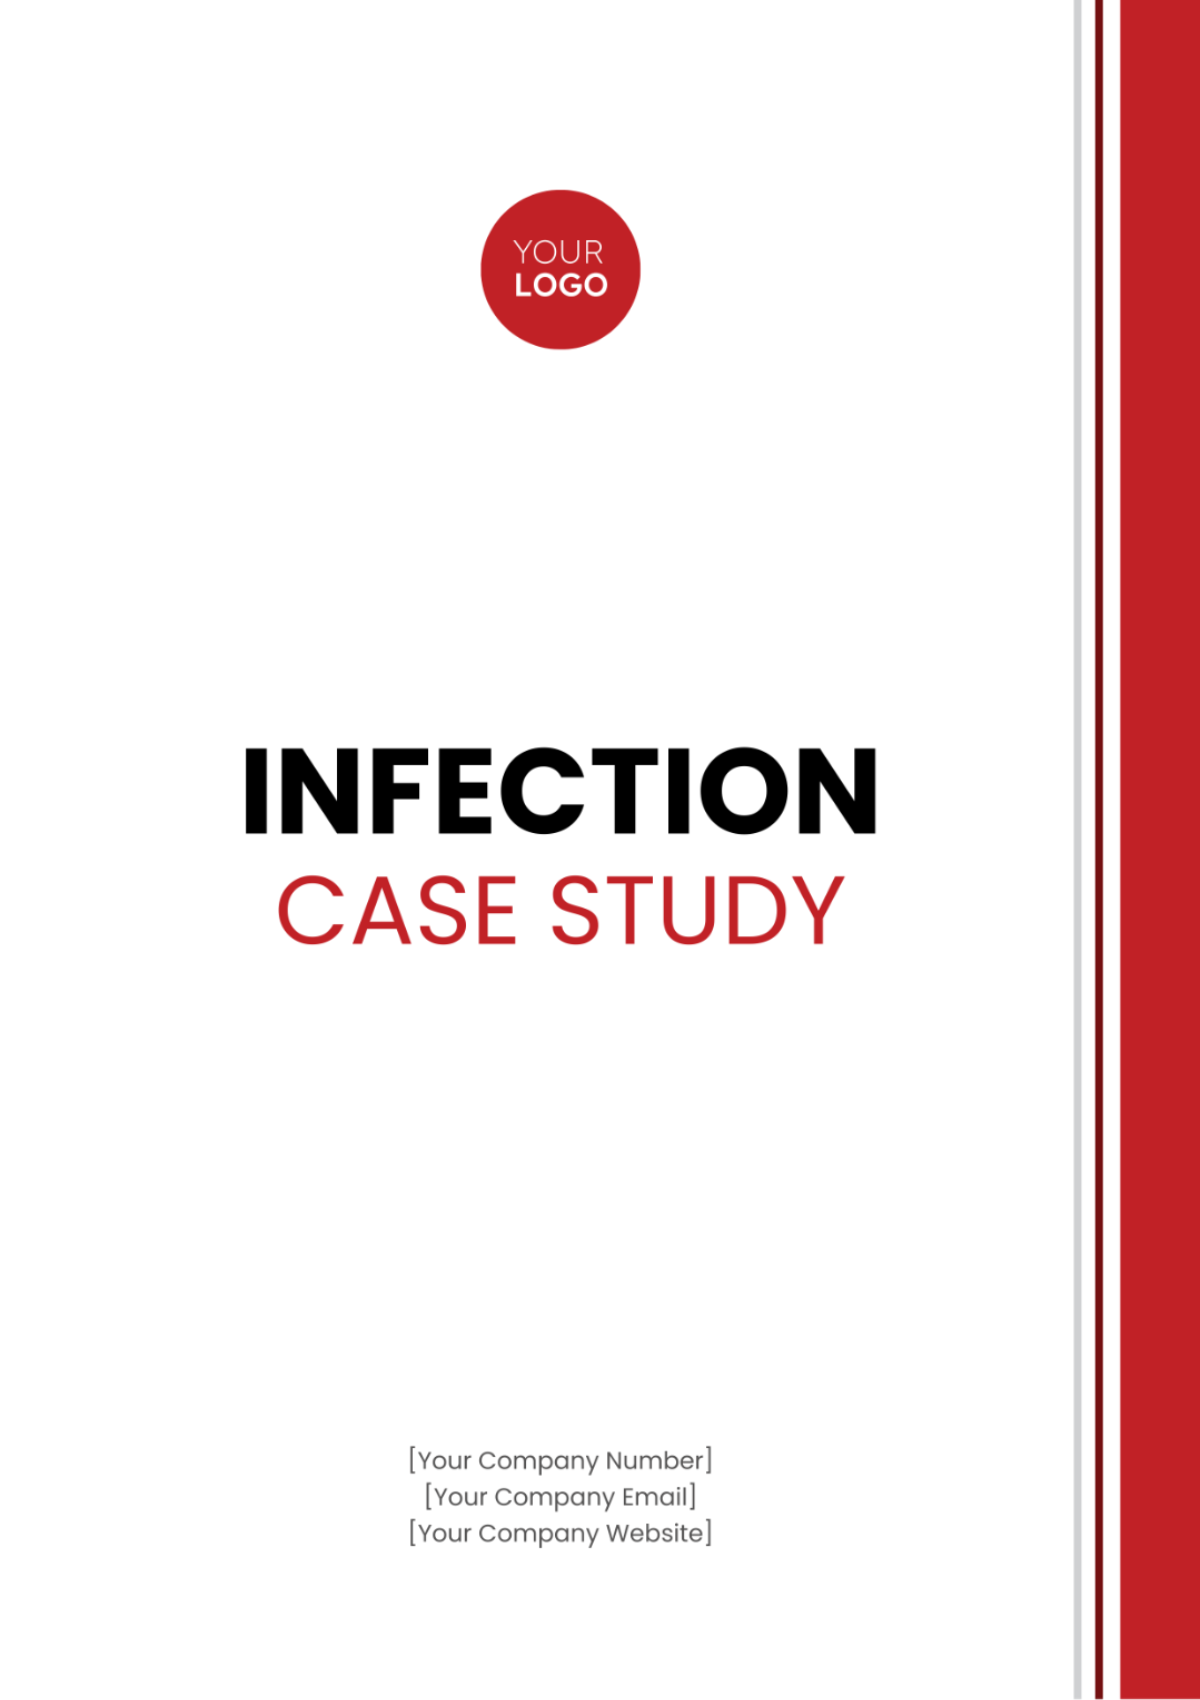 Infection Case Study Template